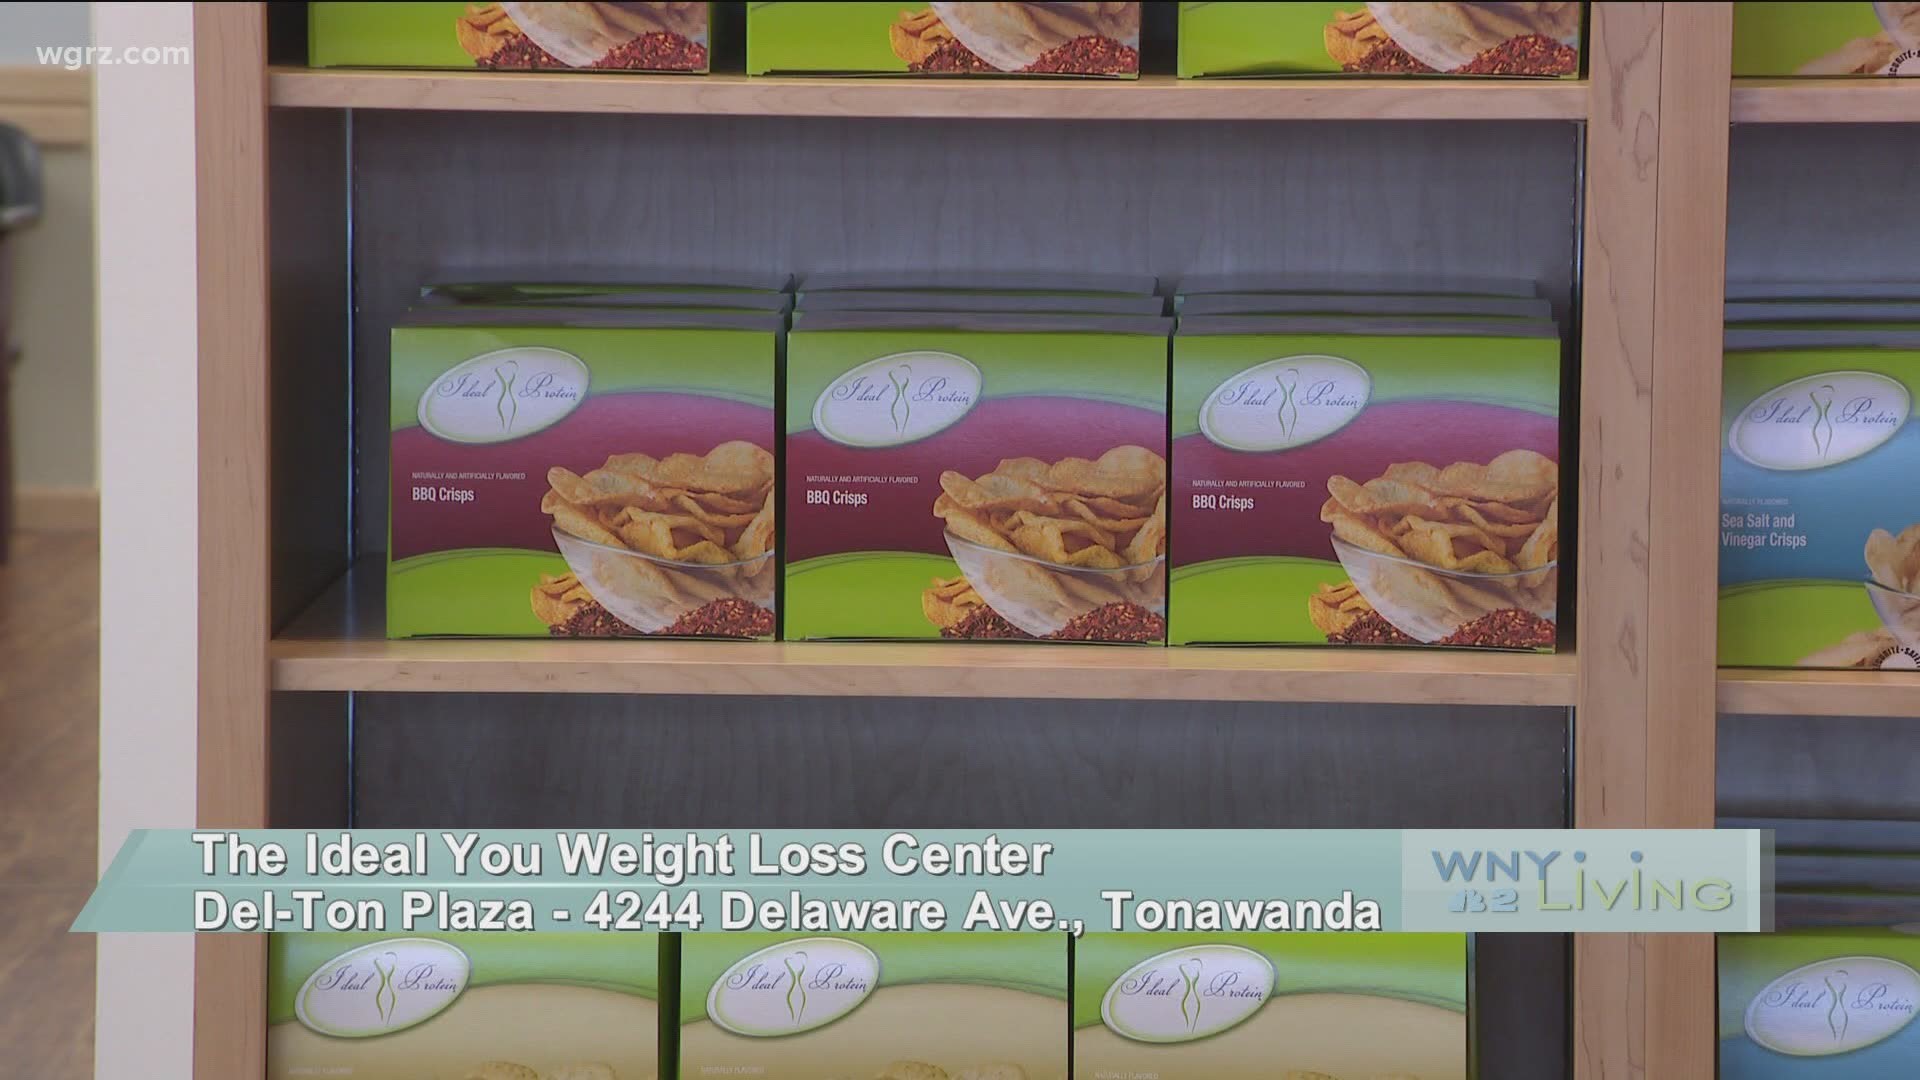 WNY Living - September 19 - The Ideal You Weight Loss Center (THIS VIDEO IS SPONSORED BY THE IDEAL YOU WEIGHT LOSS CENTER)